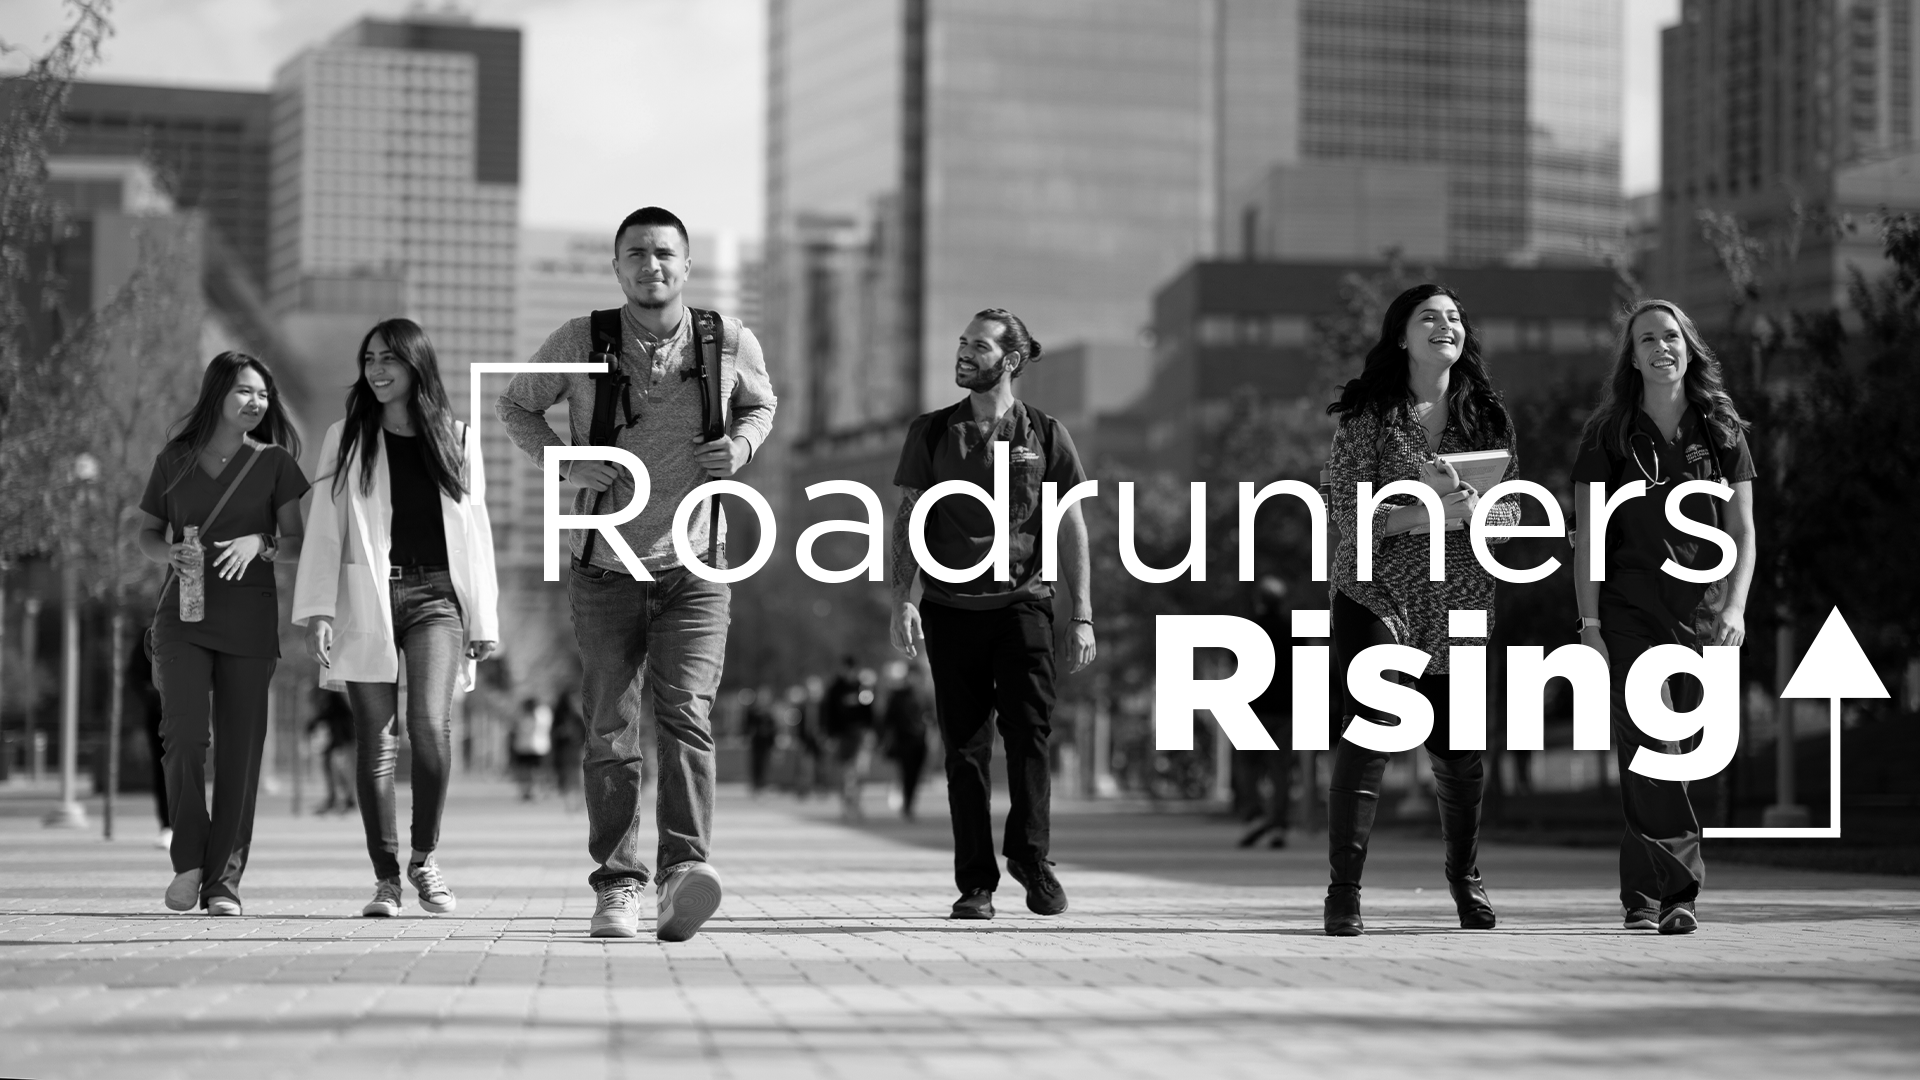 Roadrunners Rising logo with students walking on campus in the background.